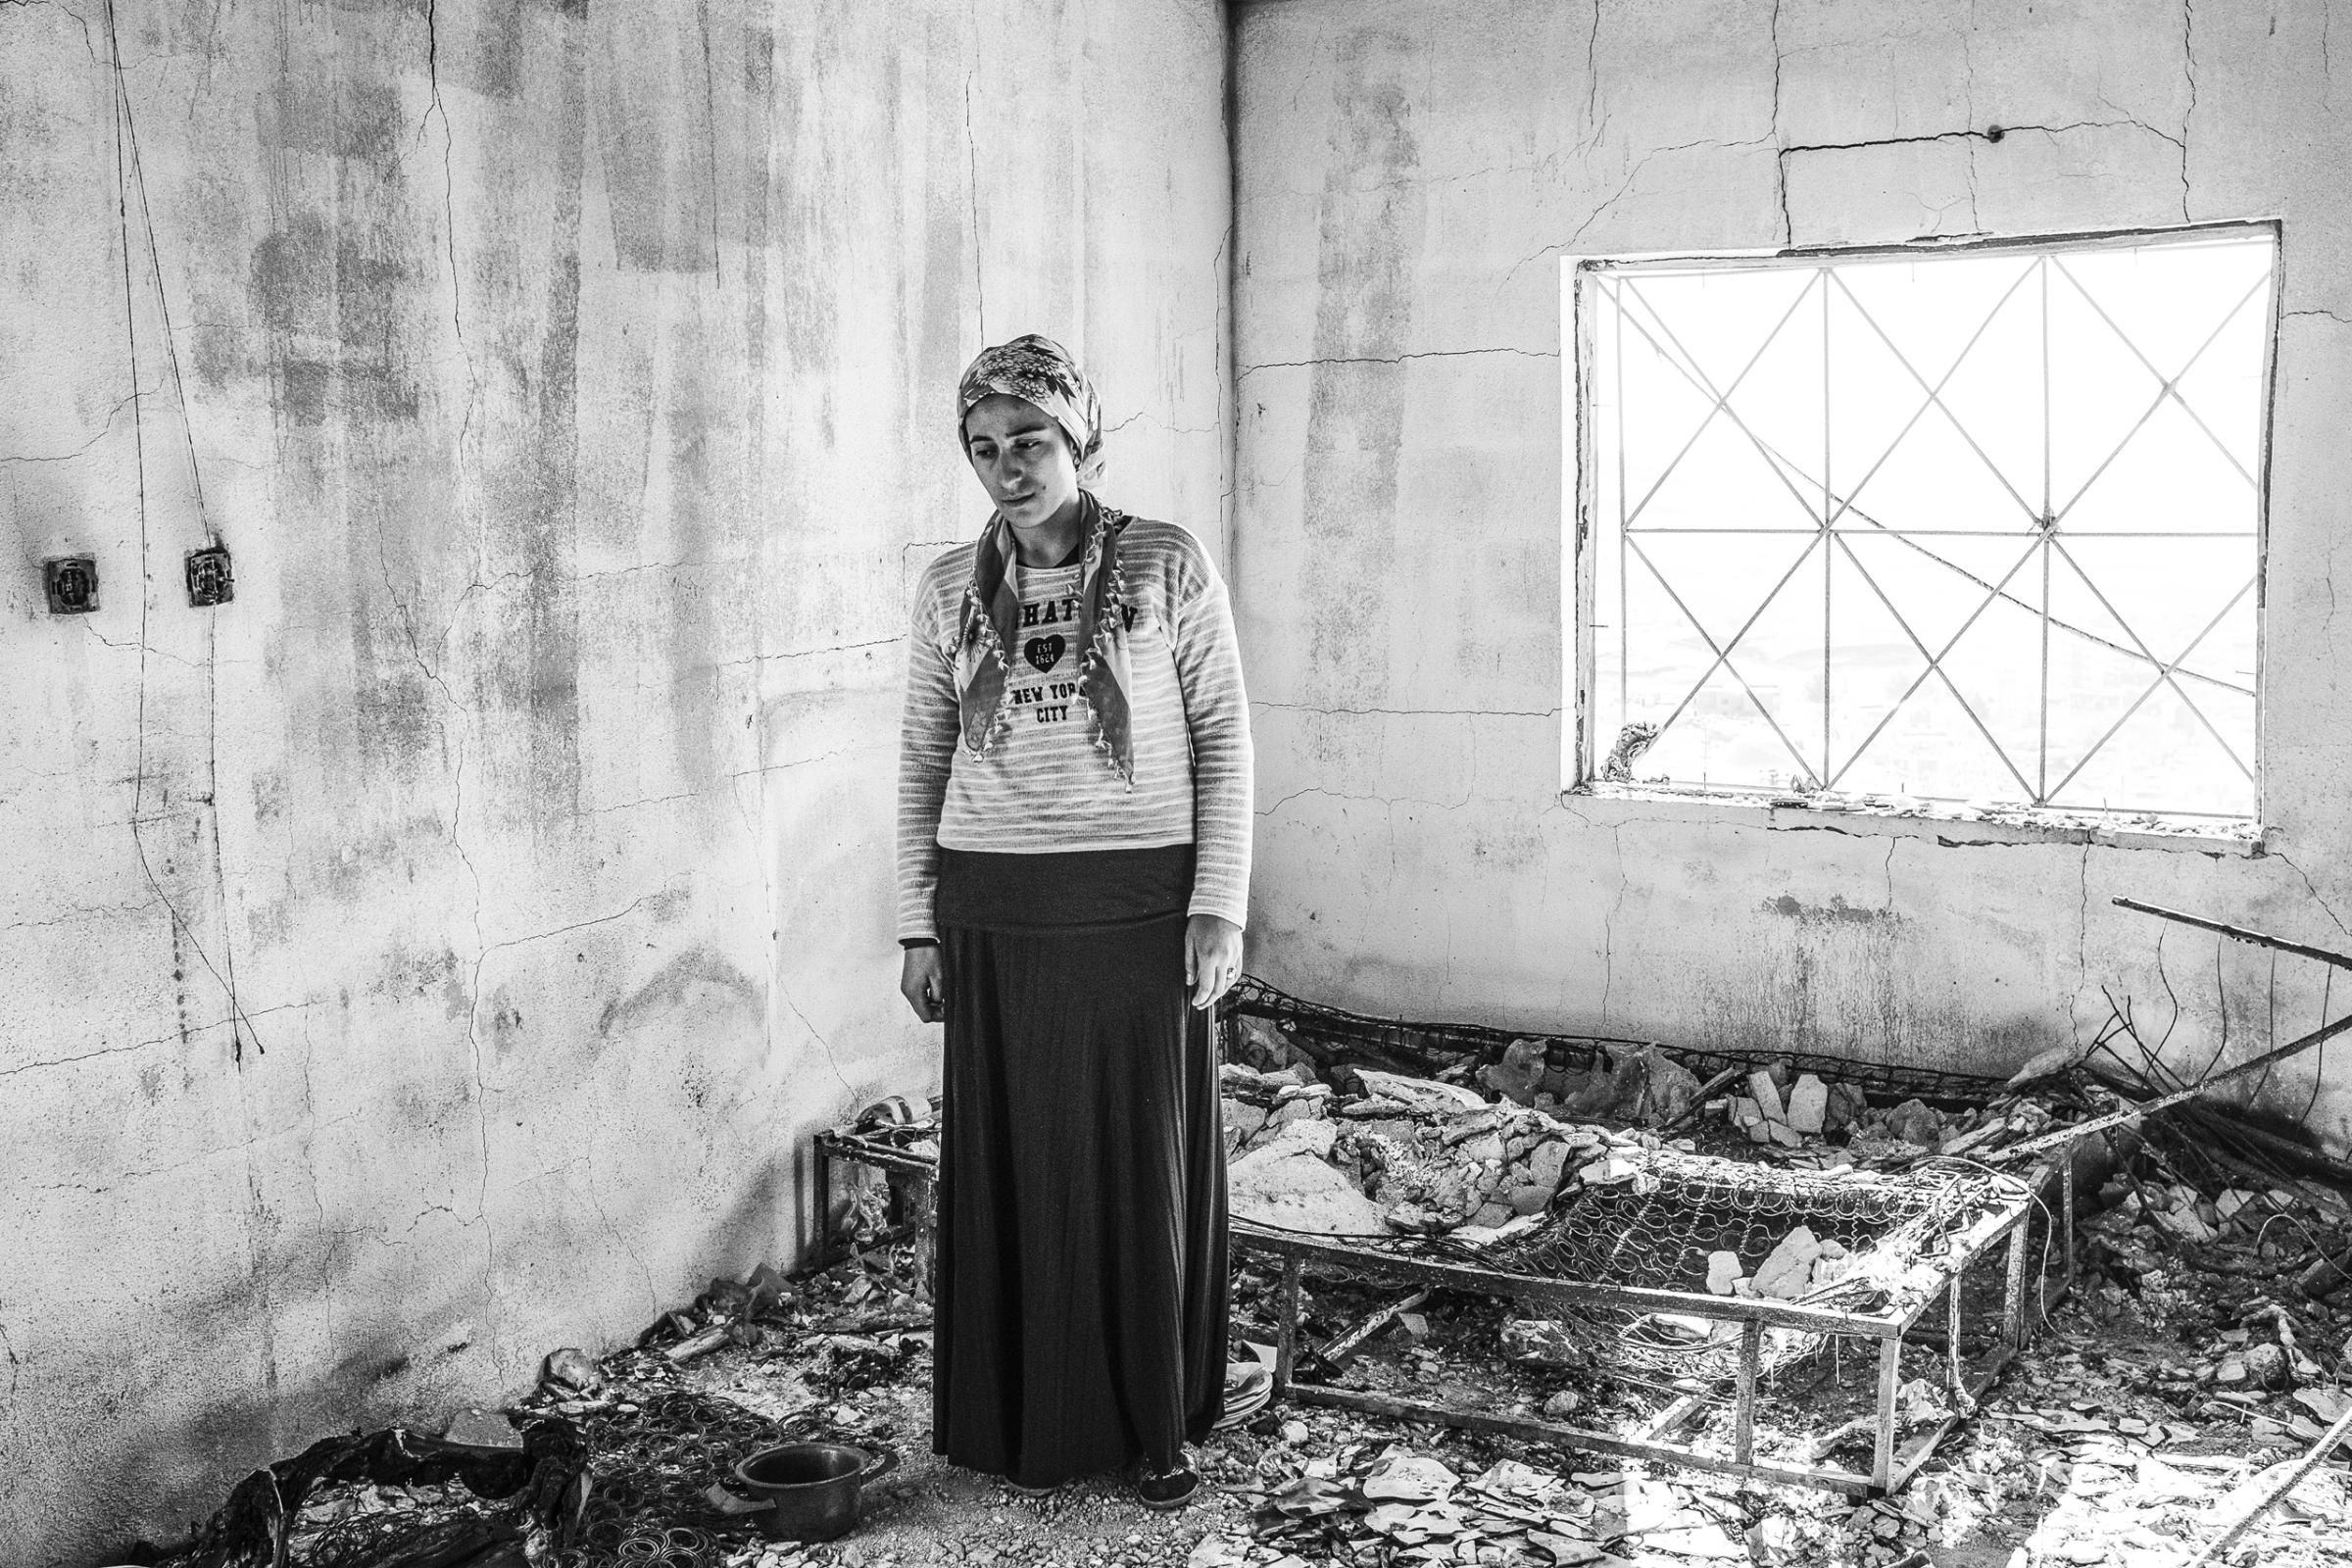 Zahide Onen stands in the wreckage of her home that was hit by a Turkish military rocket, while she and her family slept, Derik, Turkey, Dec. 2015.